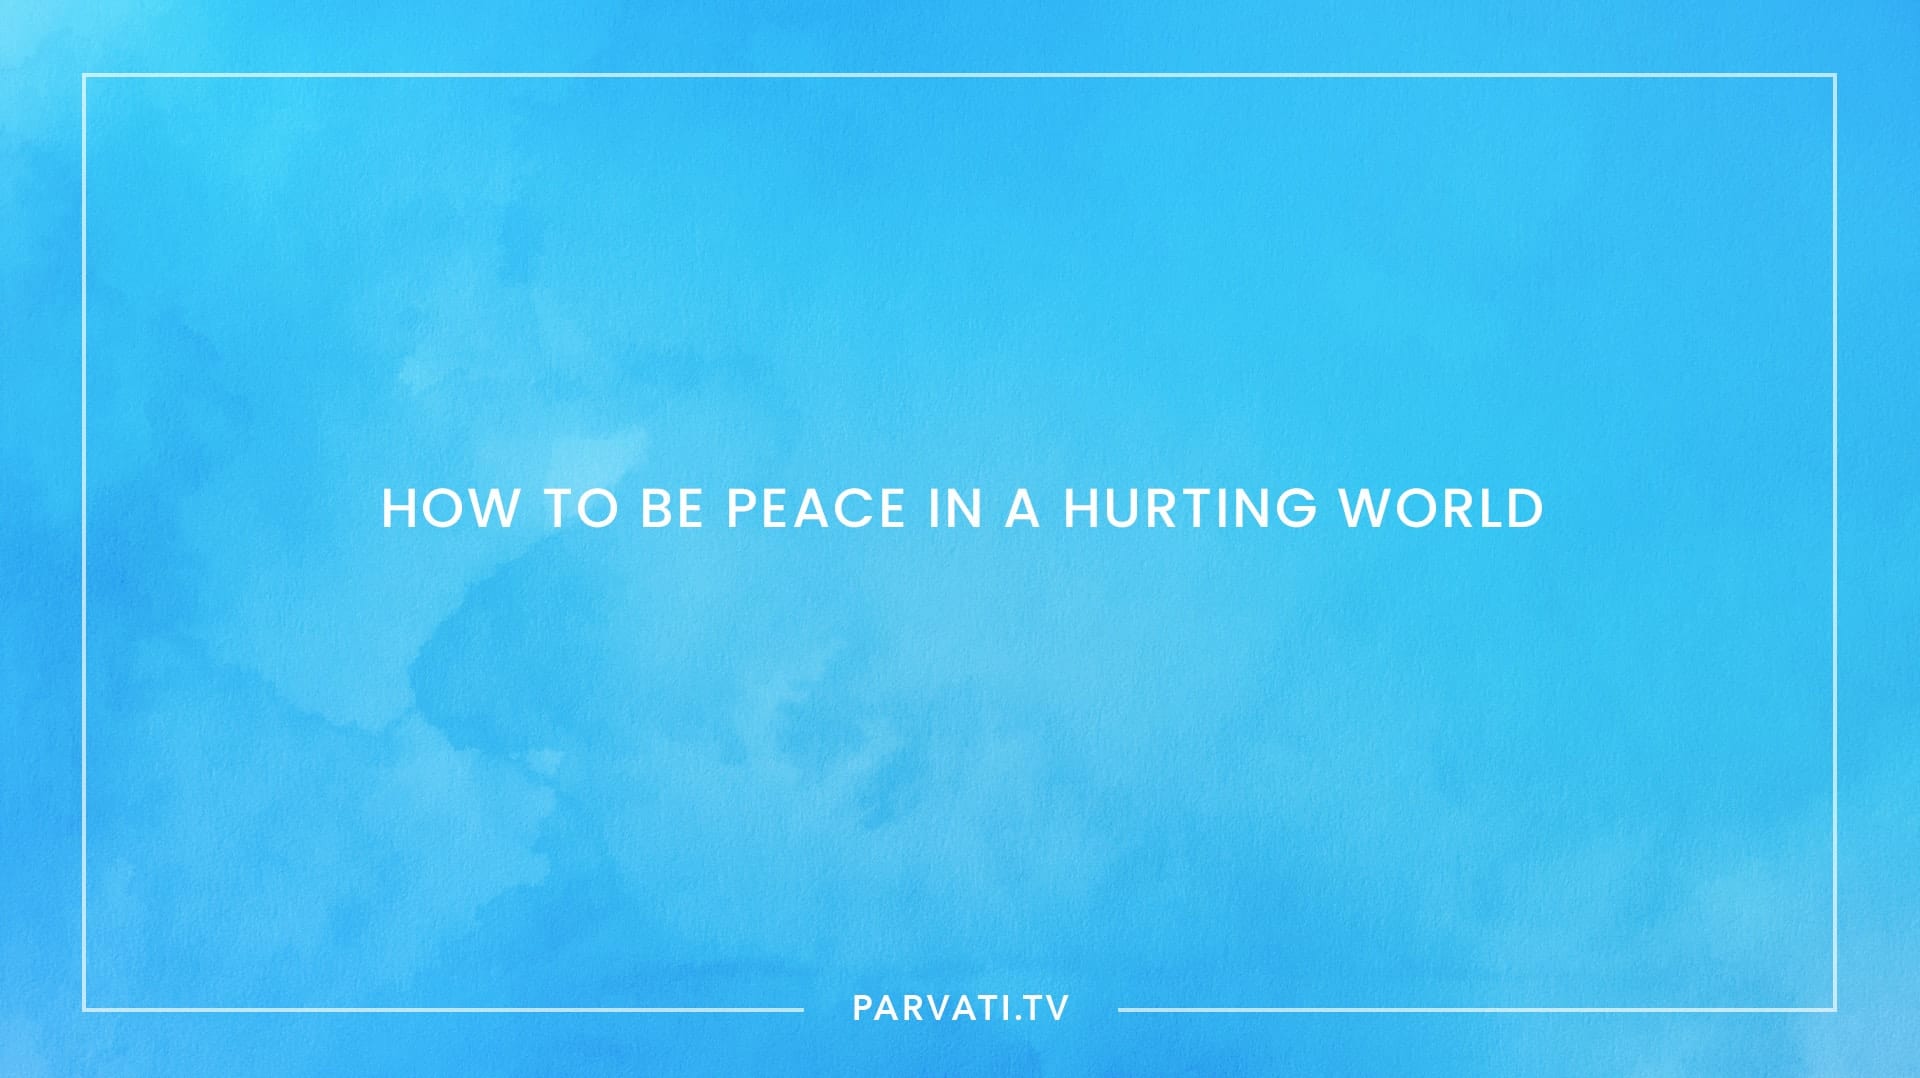 How to be peace in a hurting world